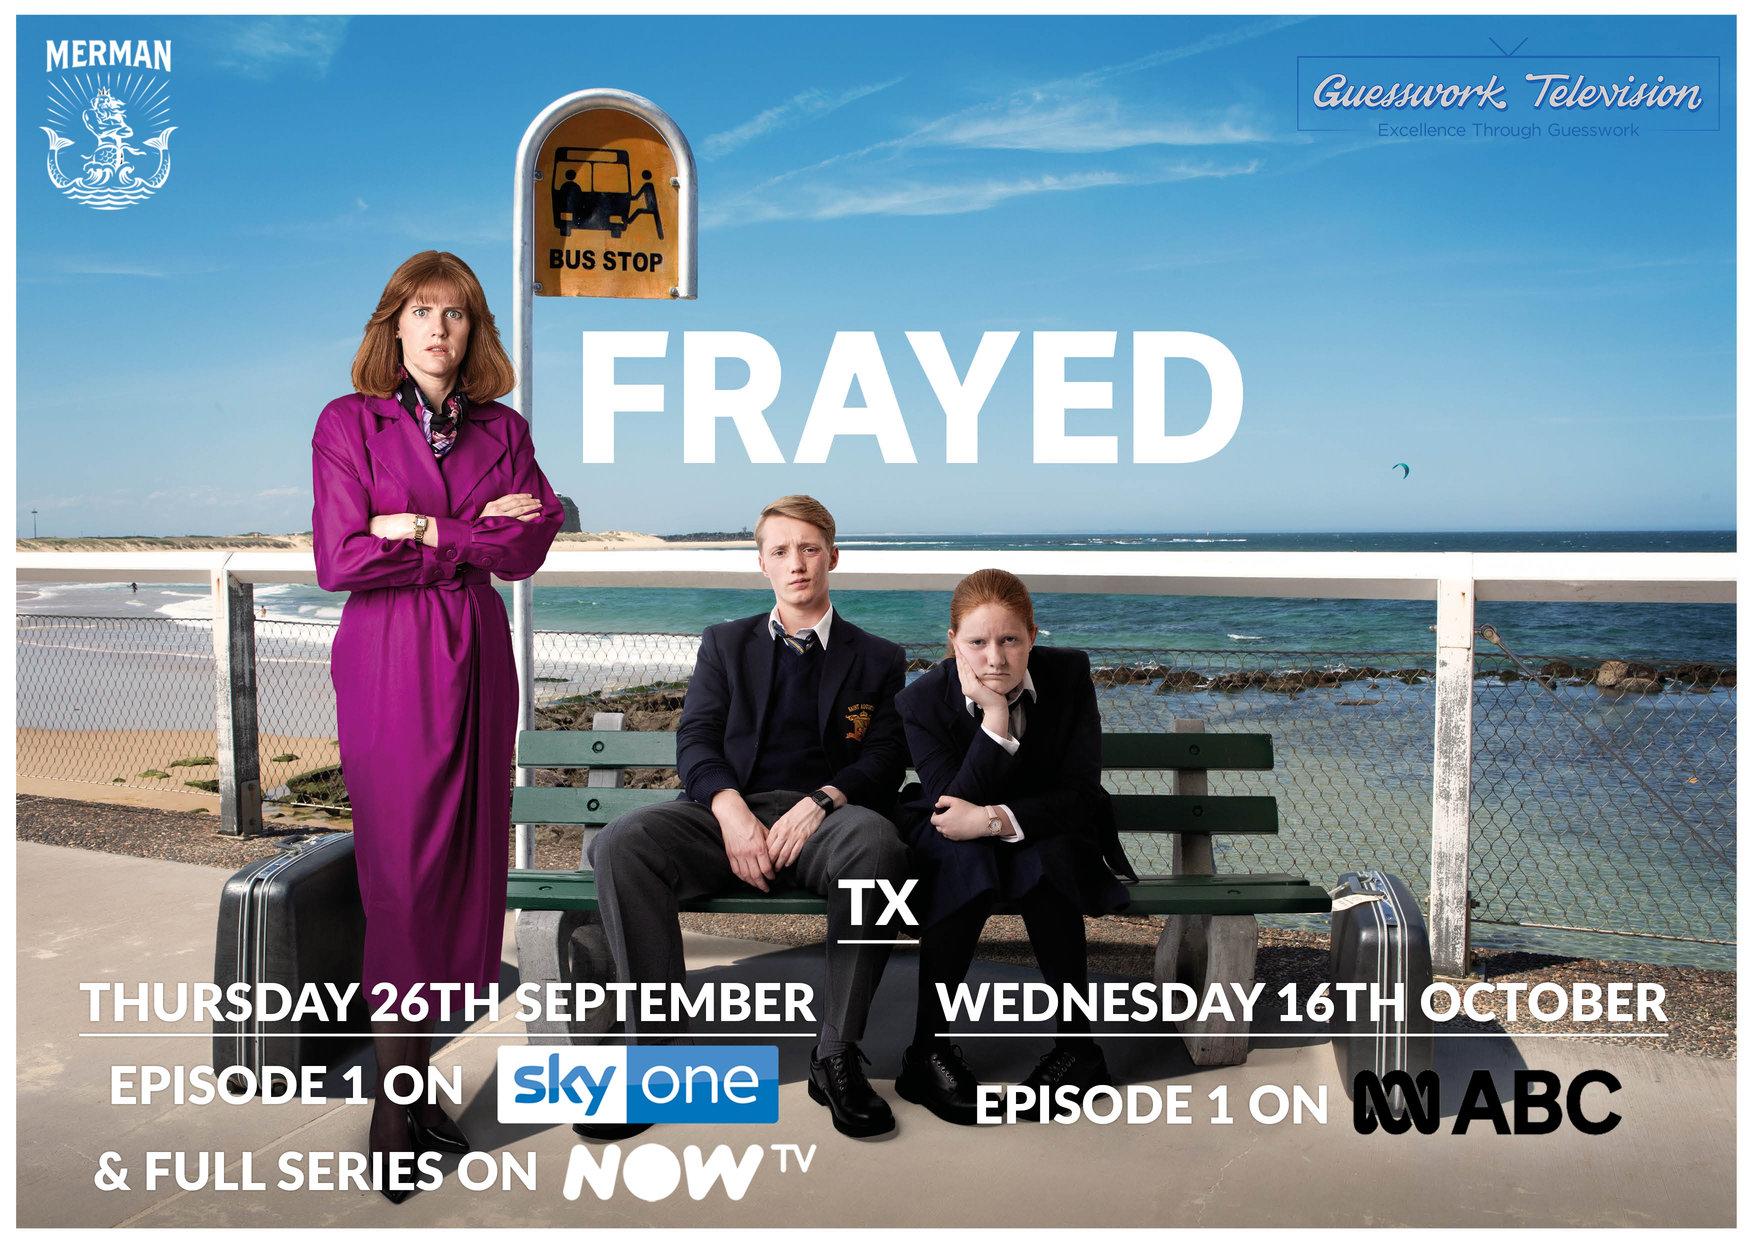 Sarah Kendall's 'Frayed' to debut on Sky One